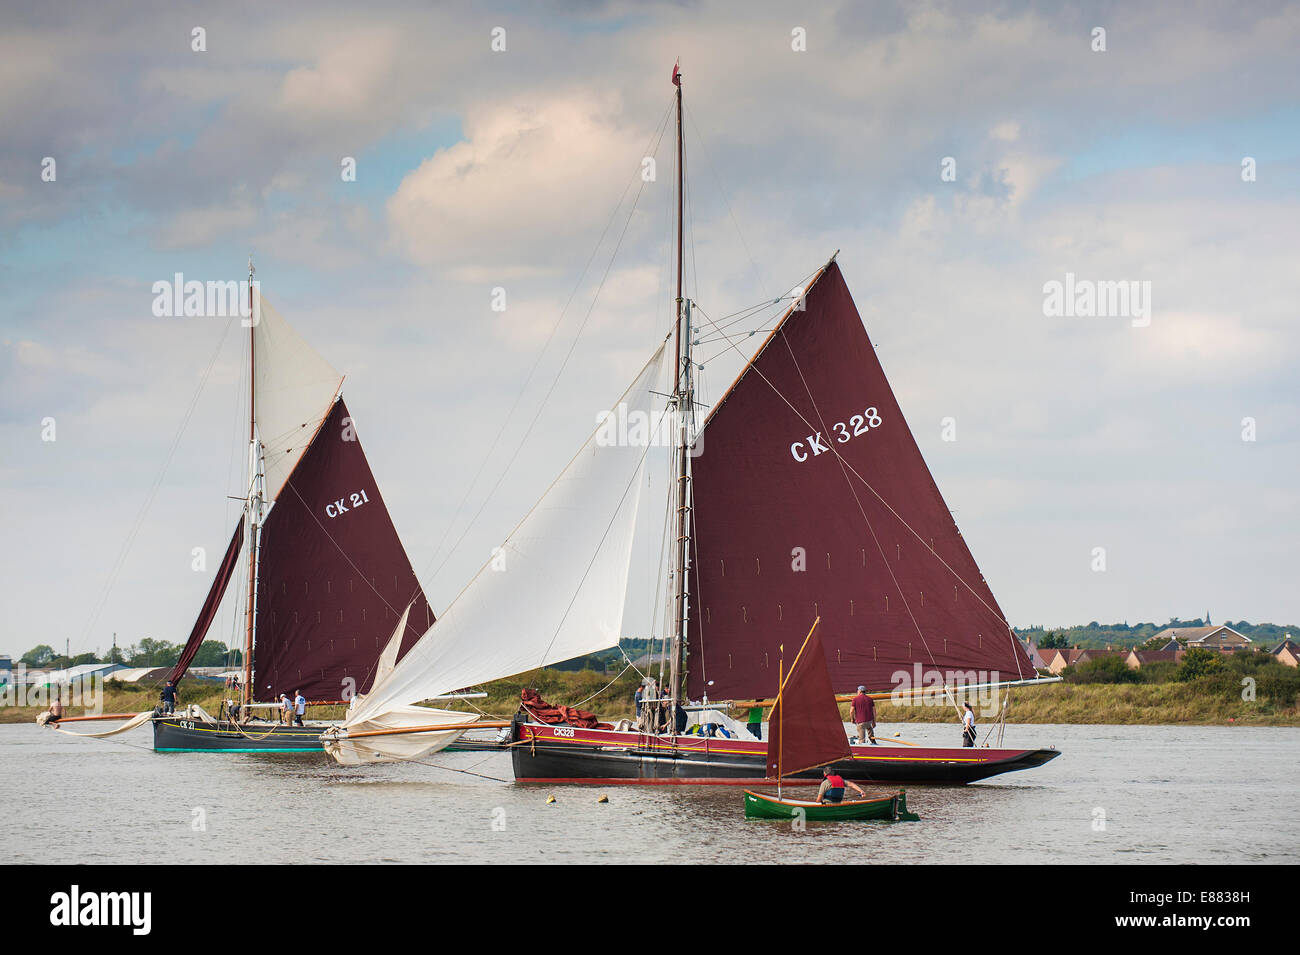 East Coast gaff rigged fishing smacks sail past a small Haybridge Roach dinghy during the Parade of Sail at the Maldon Regatta. Stock Photo